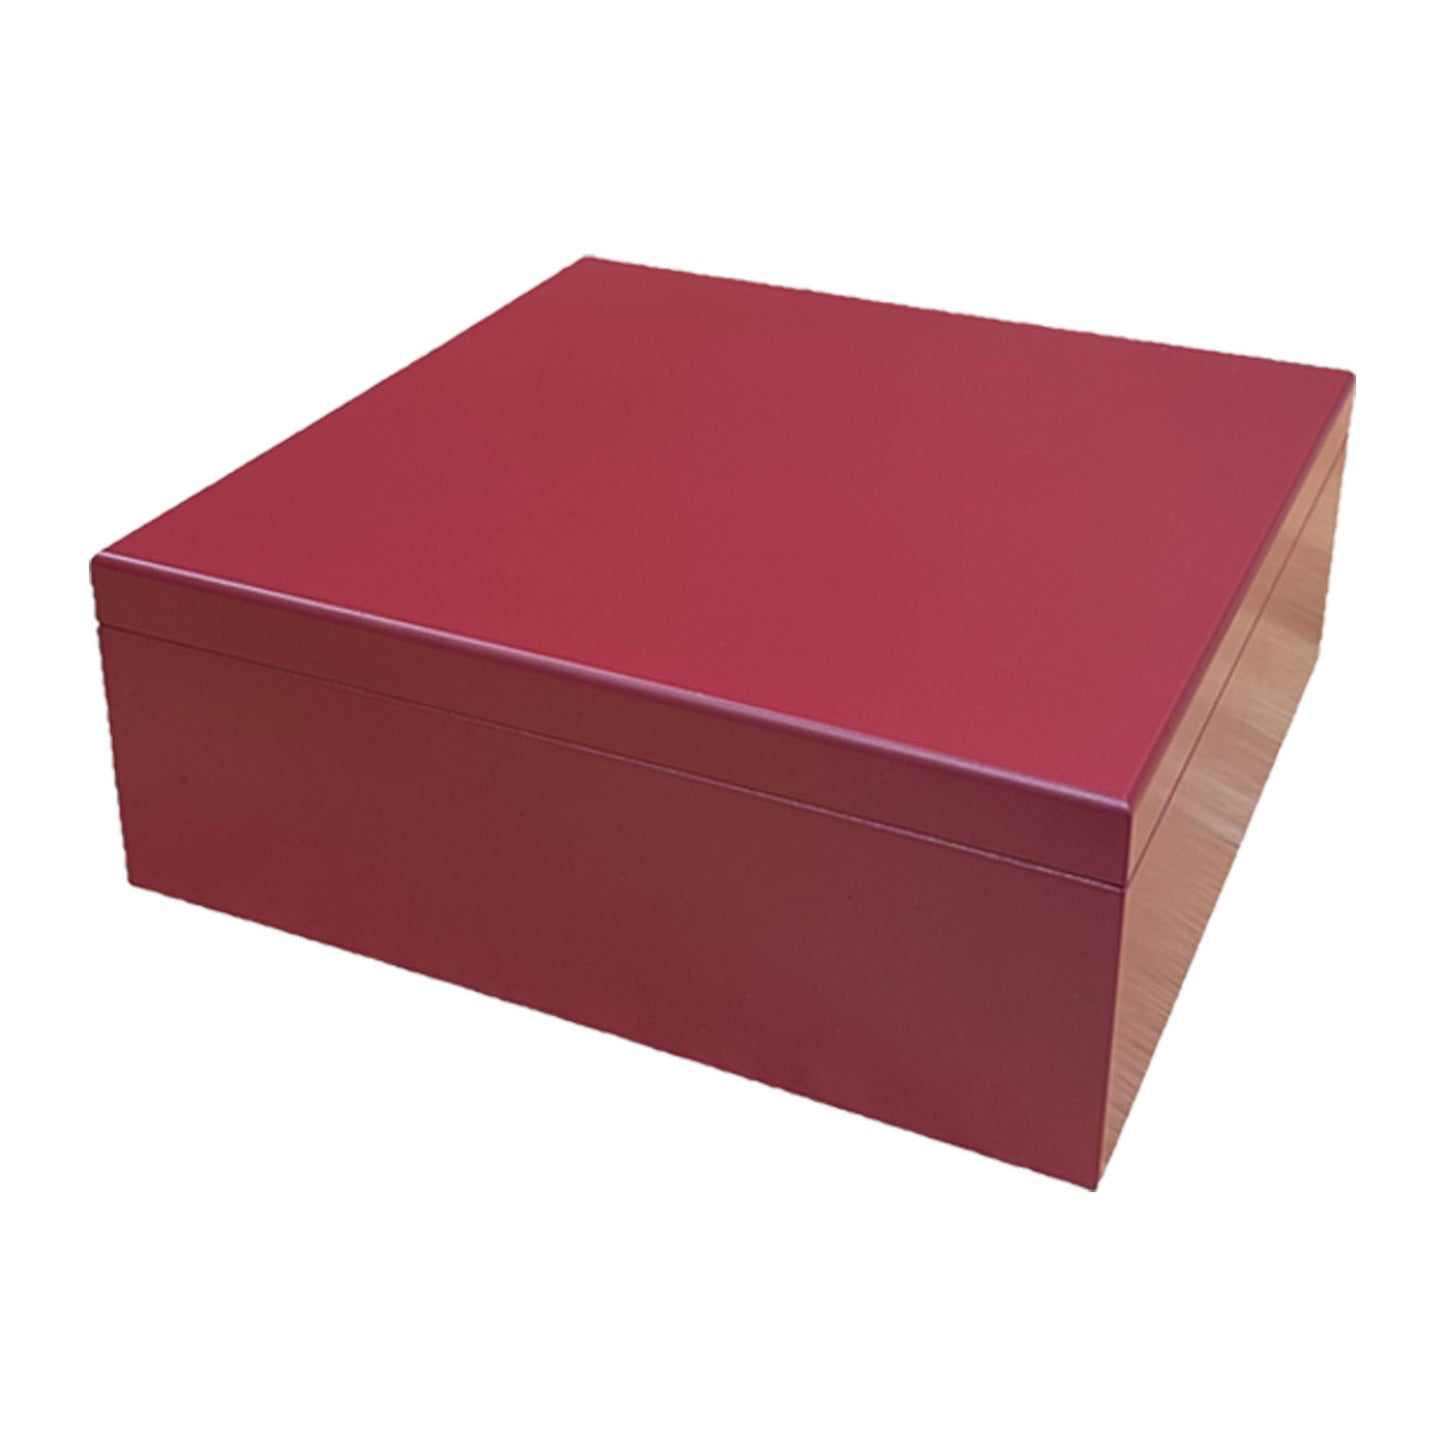 Red - Large Wood Box